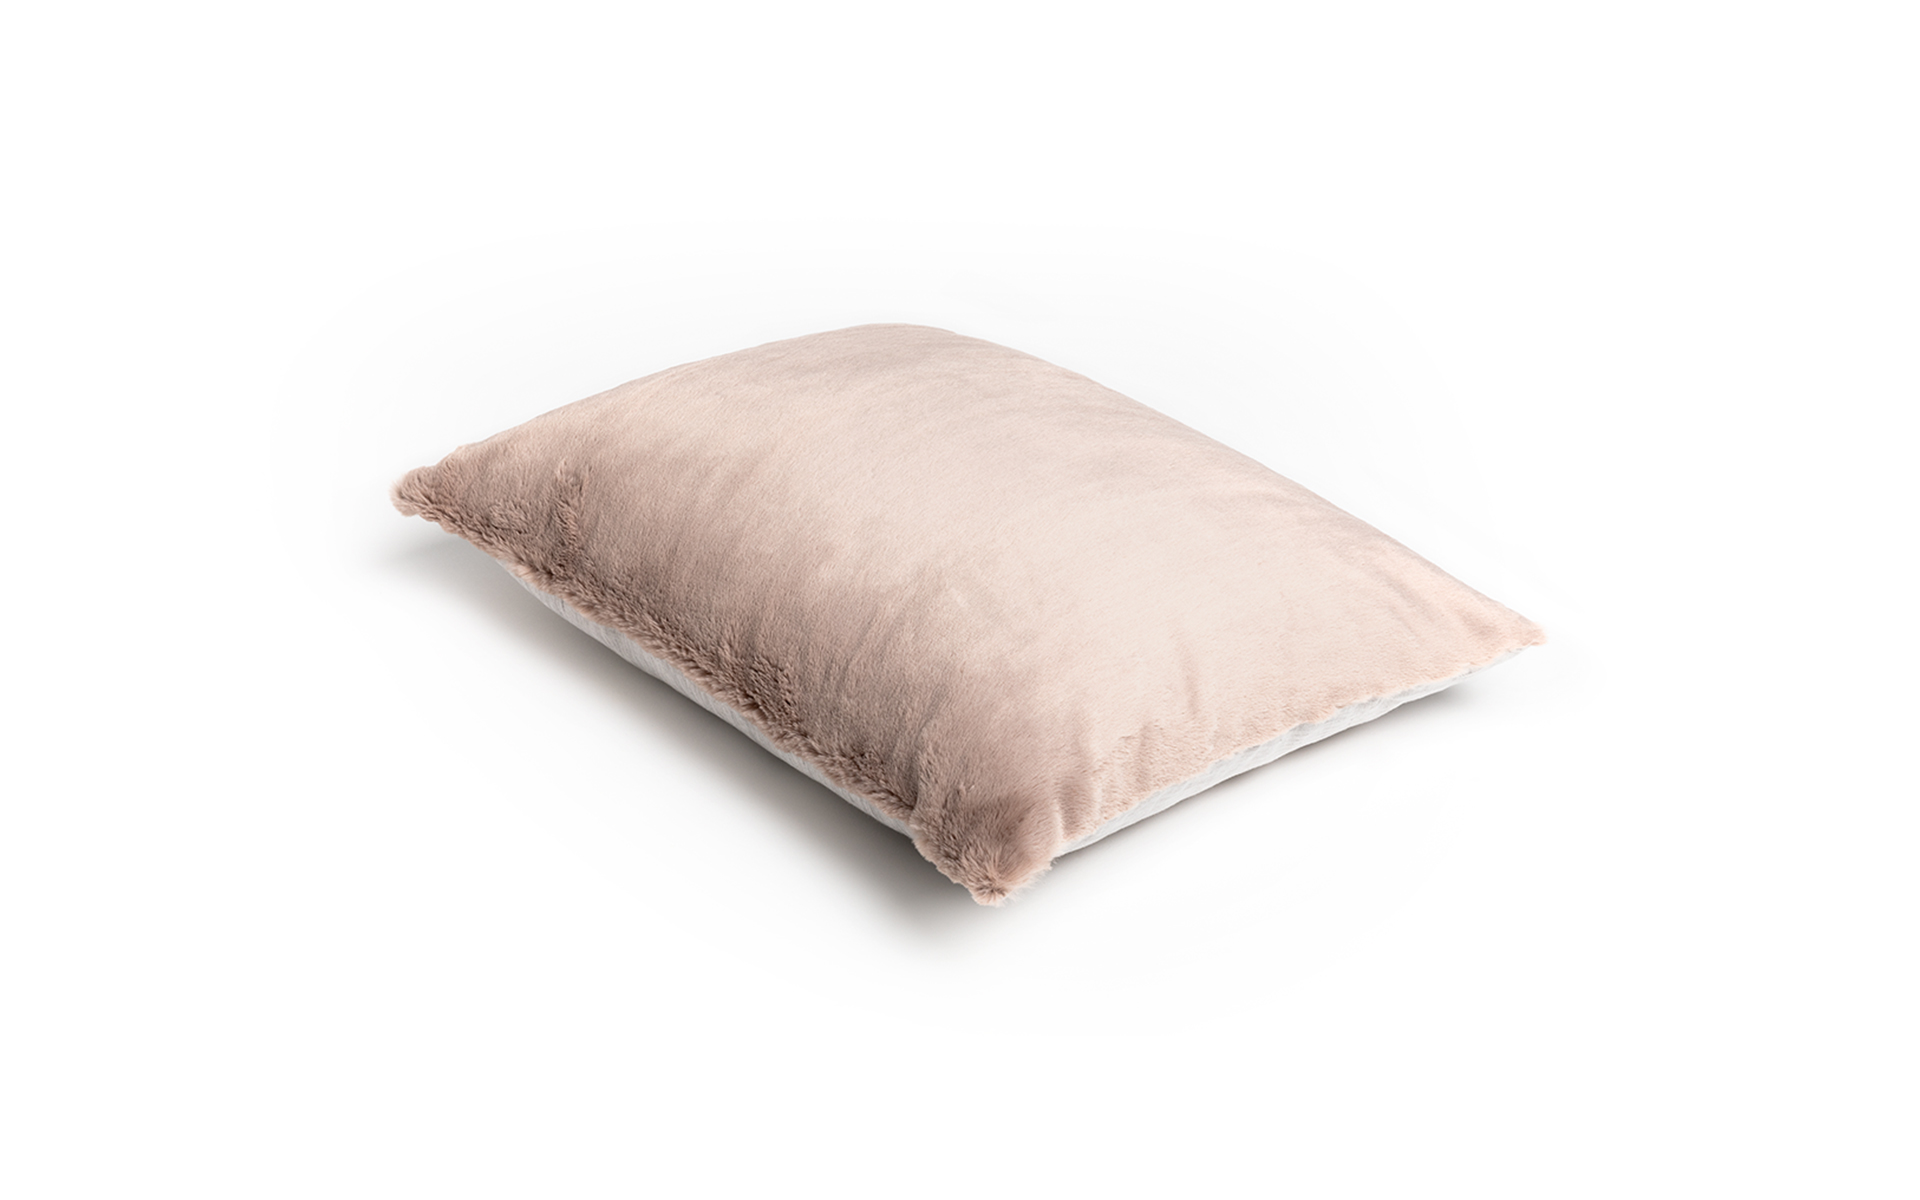 MrsMe Cushion Caprice Softtaupe productoverviewpg 1920x1200